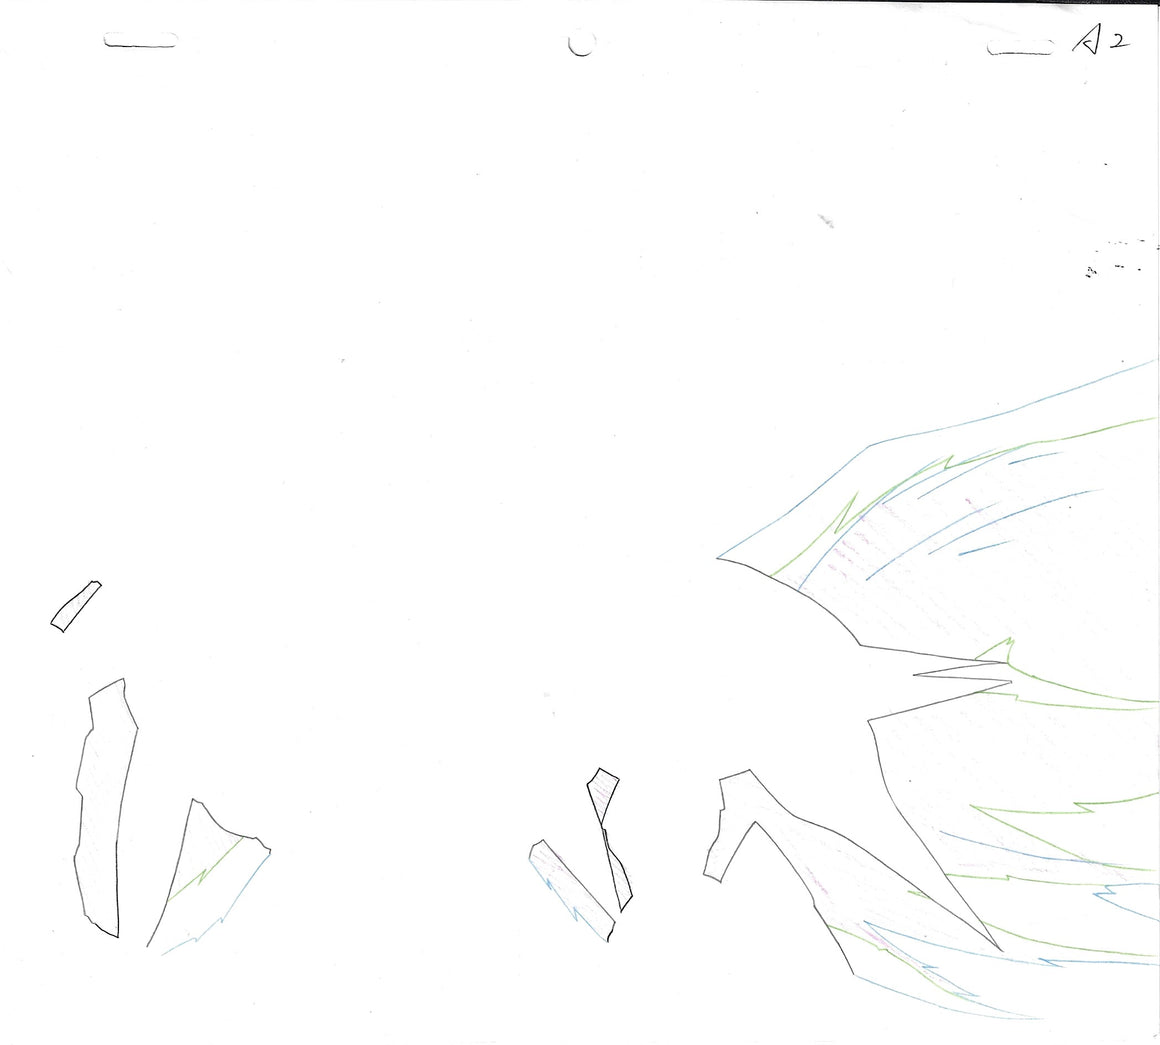 Cybuster - Cybuster - 2-layer Production Cel w/ Douga Pencil Sketch